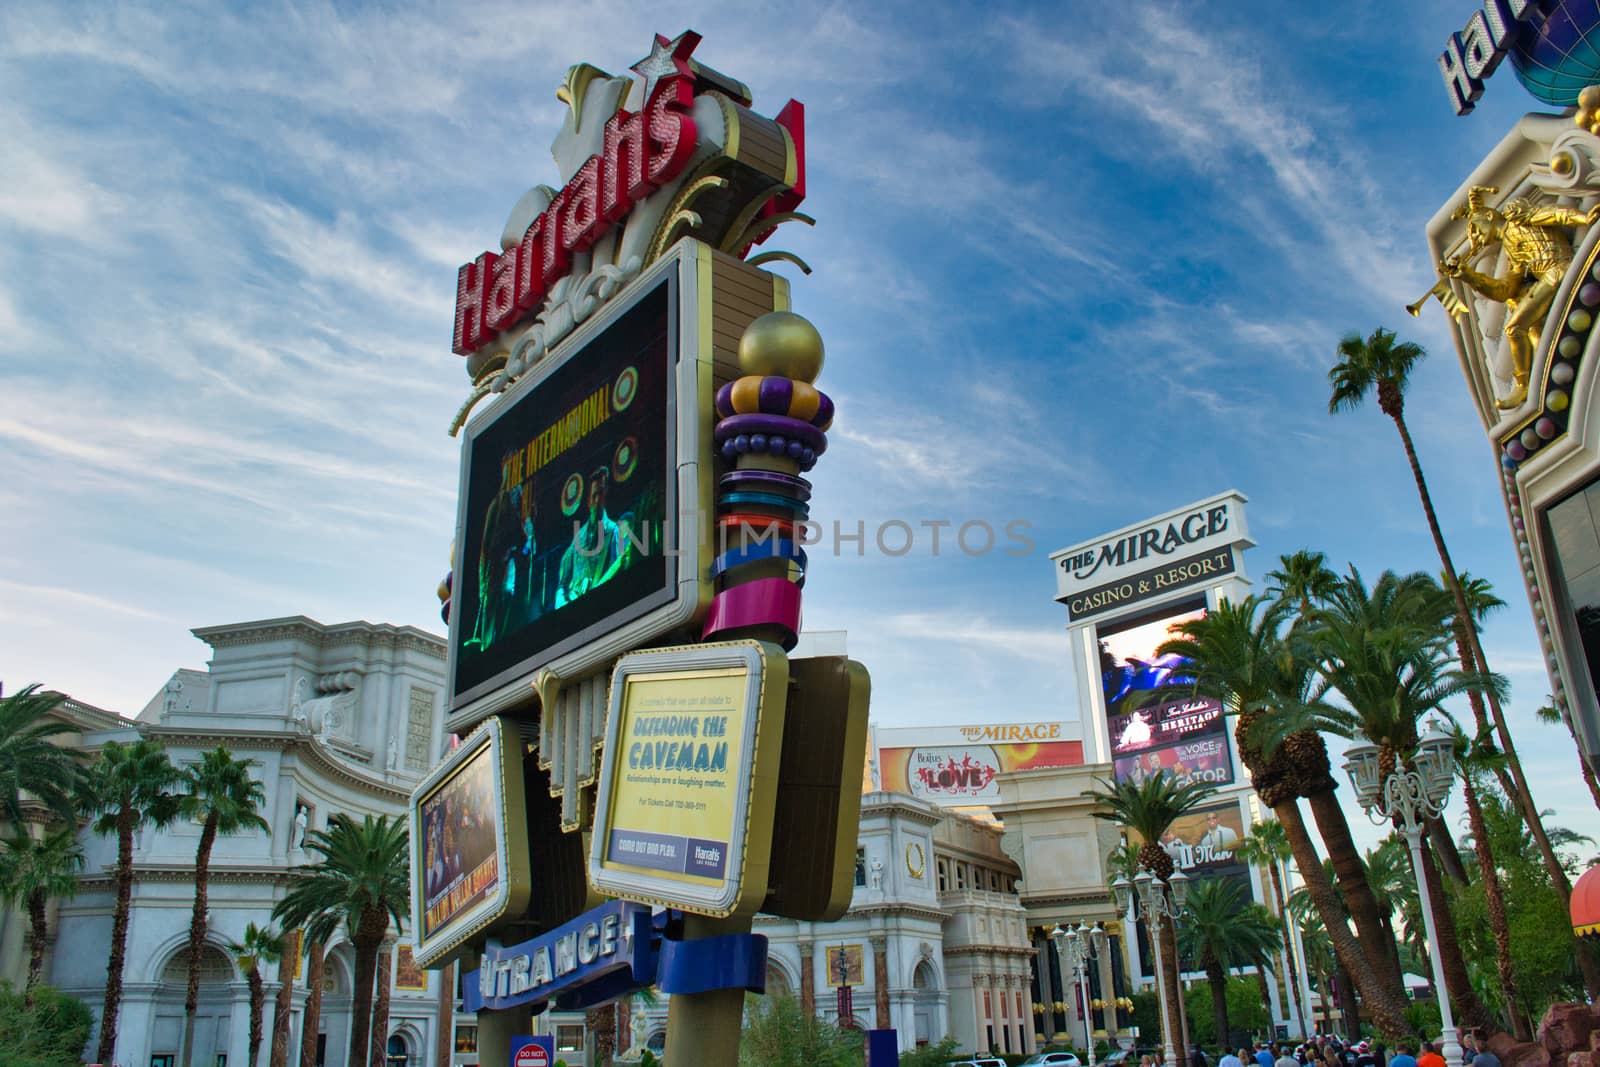 Las Vegas hotel and casino billboards ath the strip, including harrahs, and the mirage. by kb79